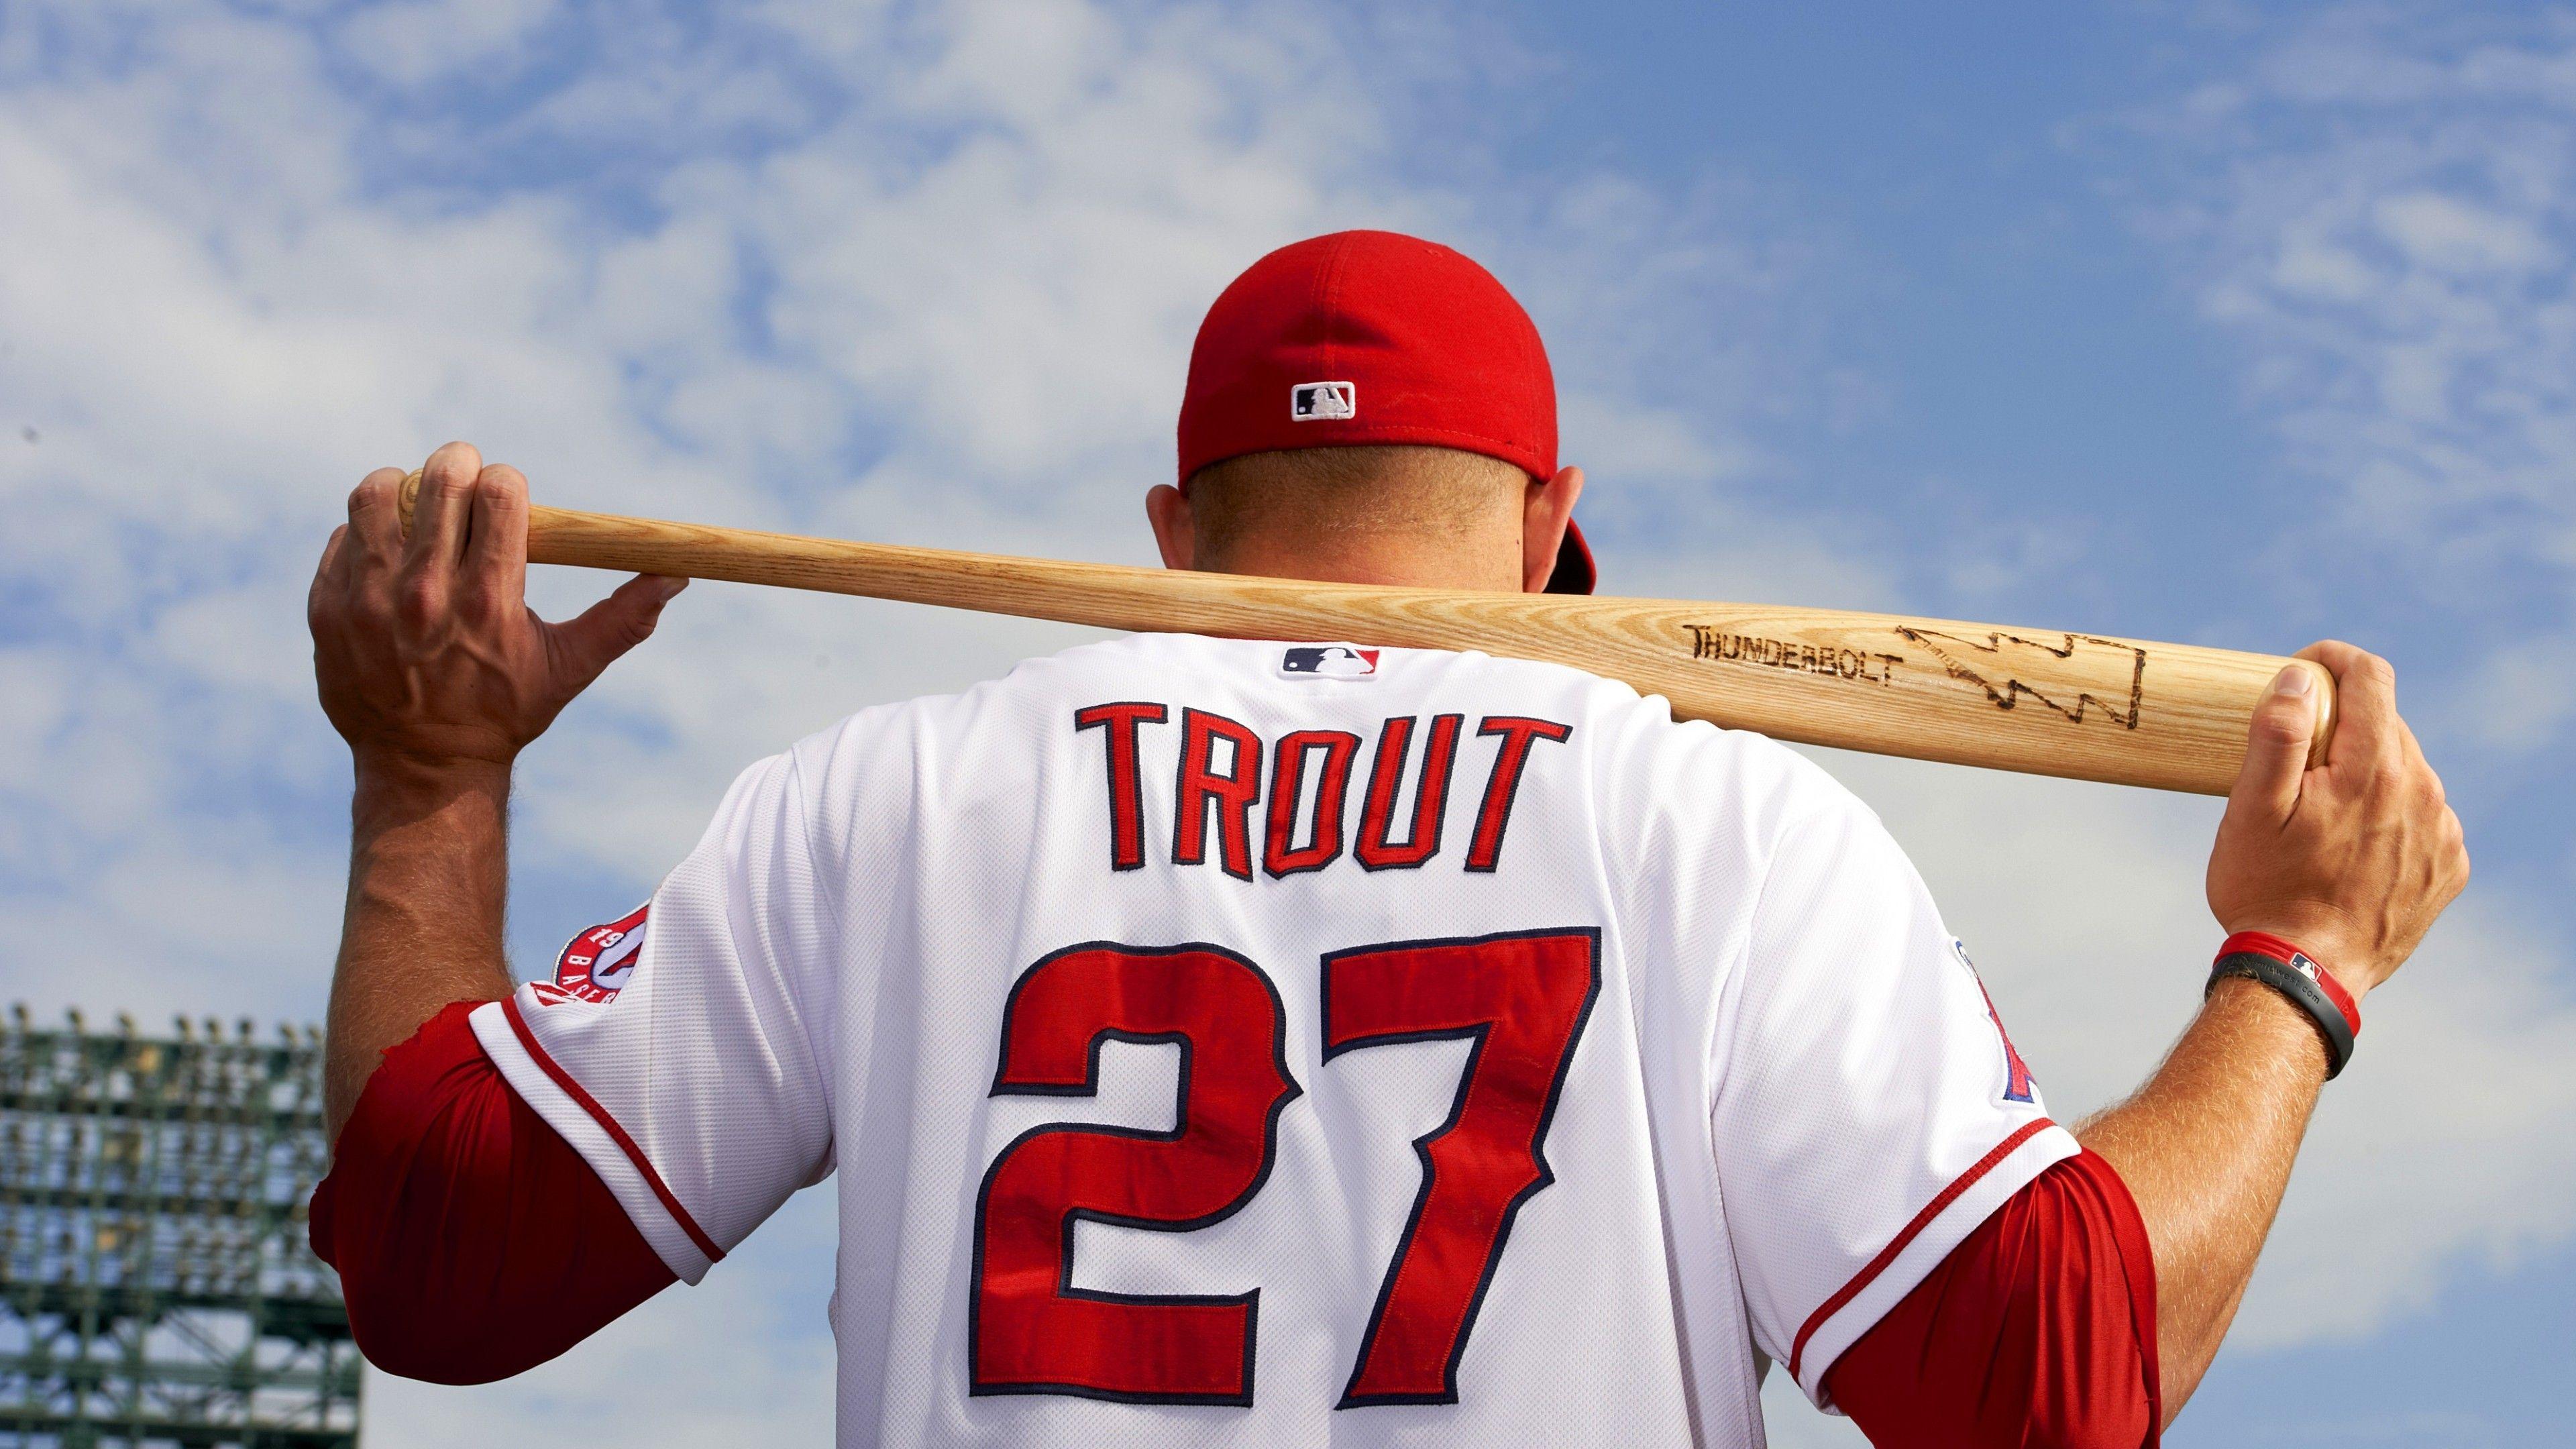 Baseball Top Baseball Players Mike Trout Los Angeles Angels